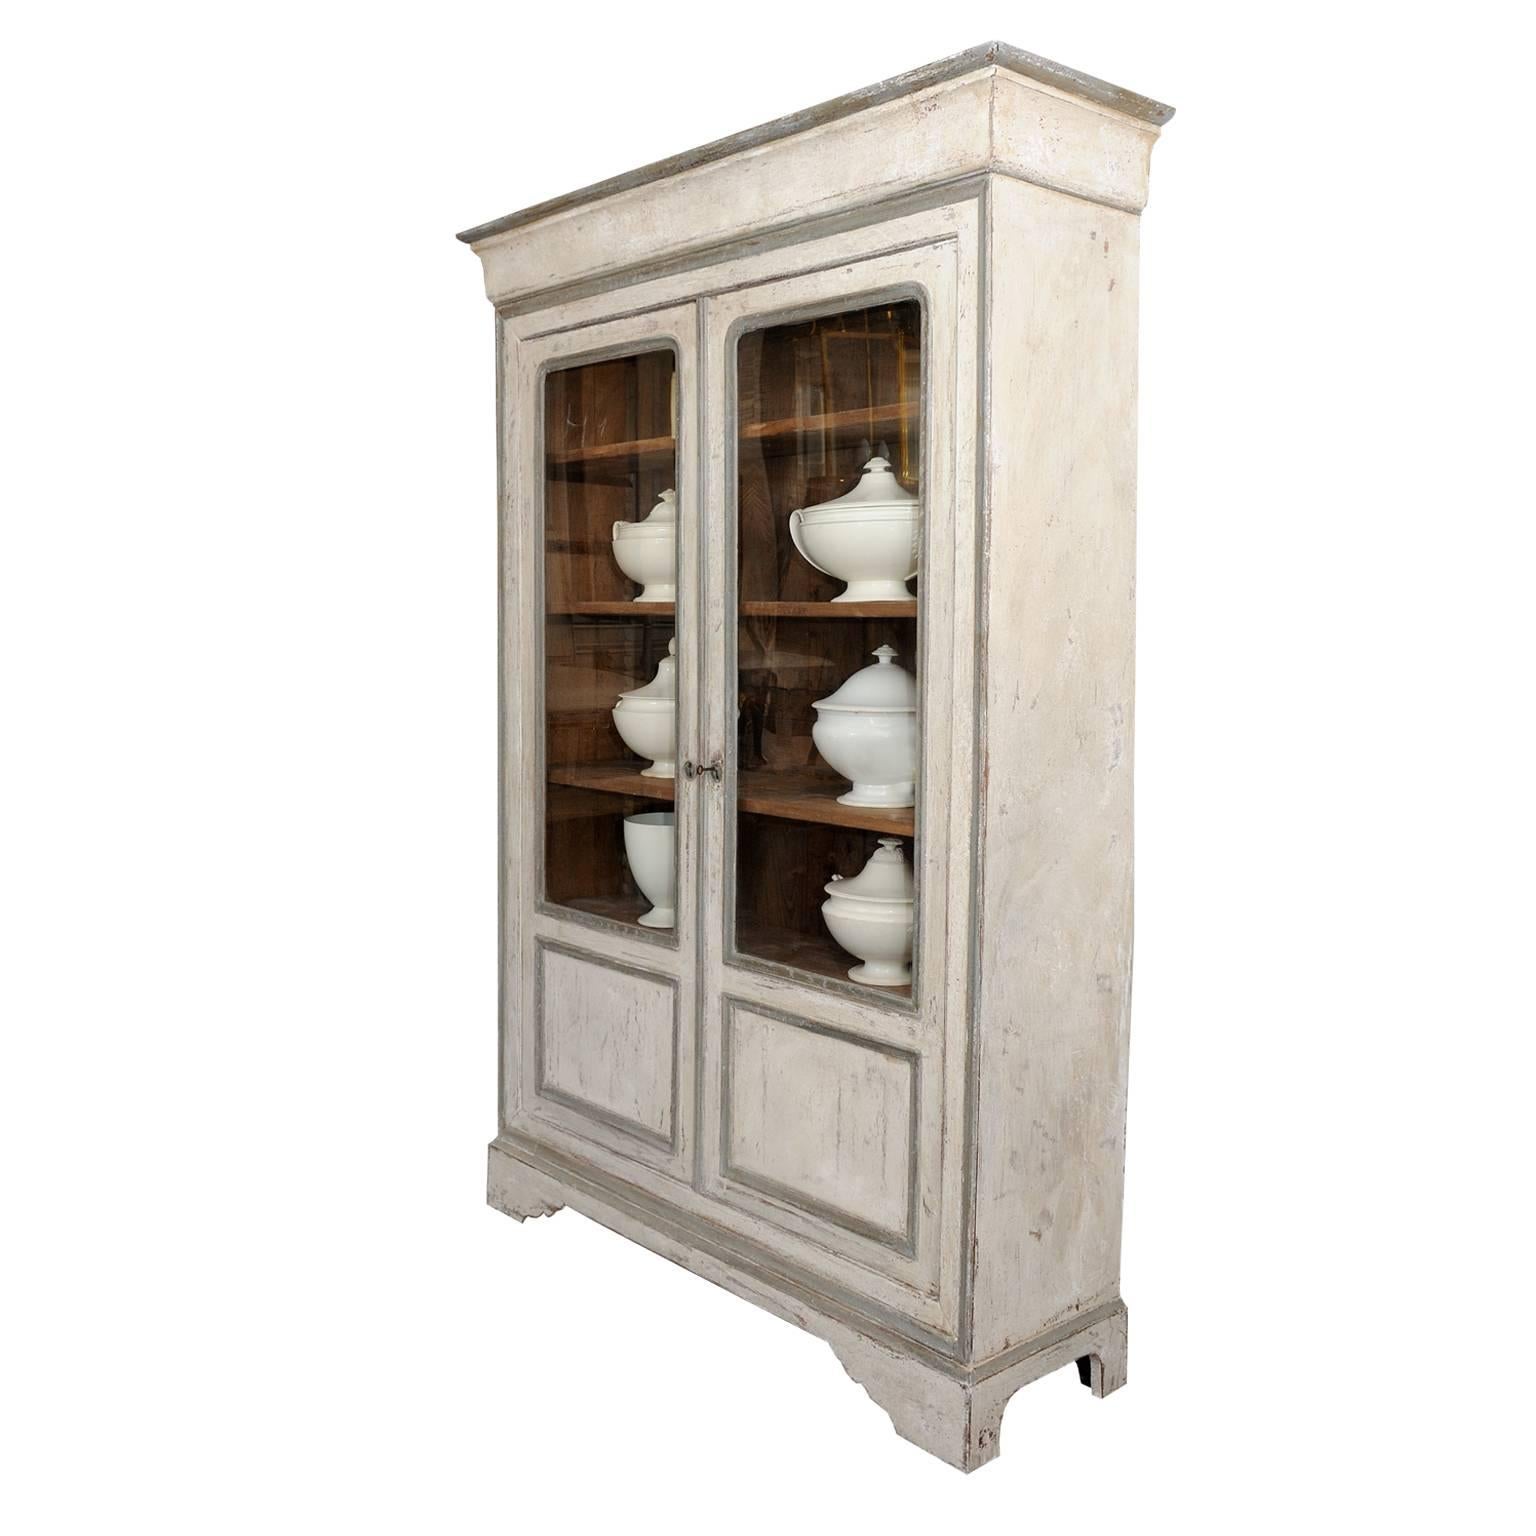 This is a large and very well proportioned French mid 19th century glazed and painted Bookcase or Cabinet, complete with four internal adjustable shelves c.1840.
